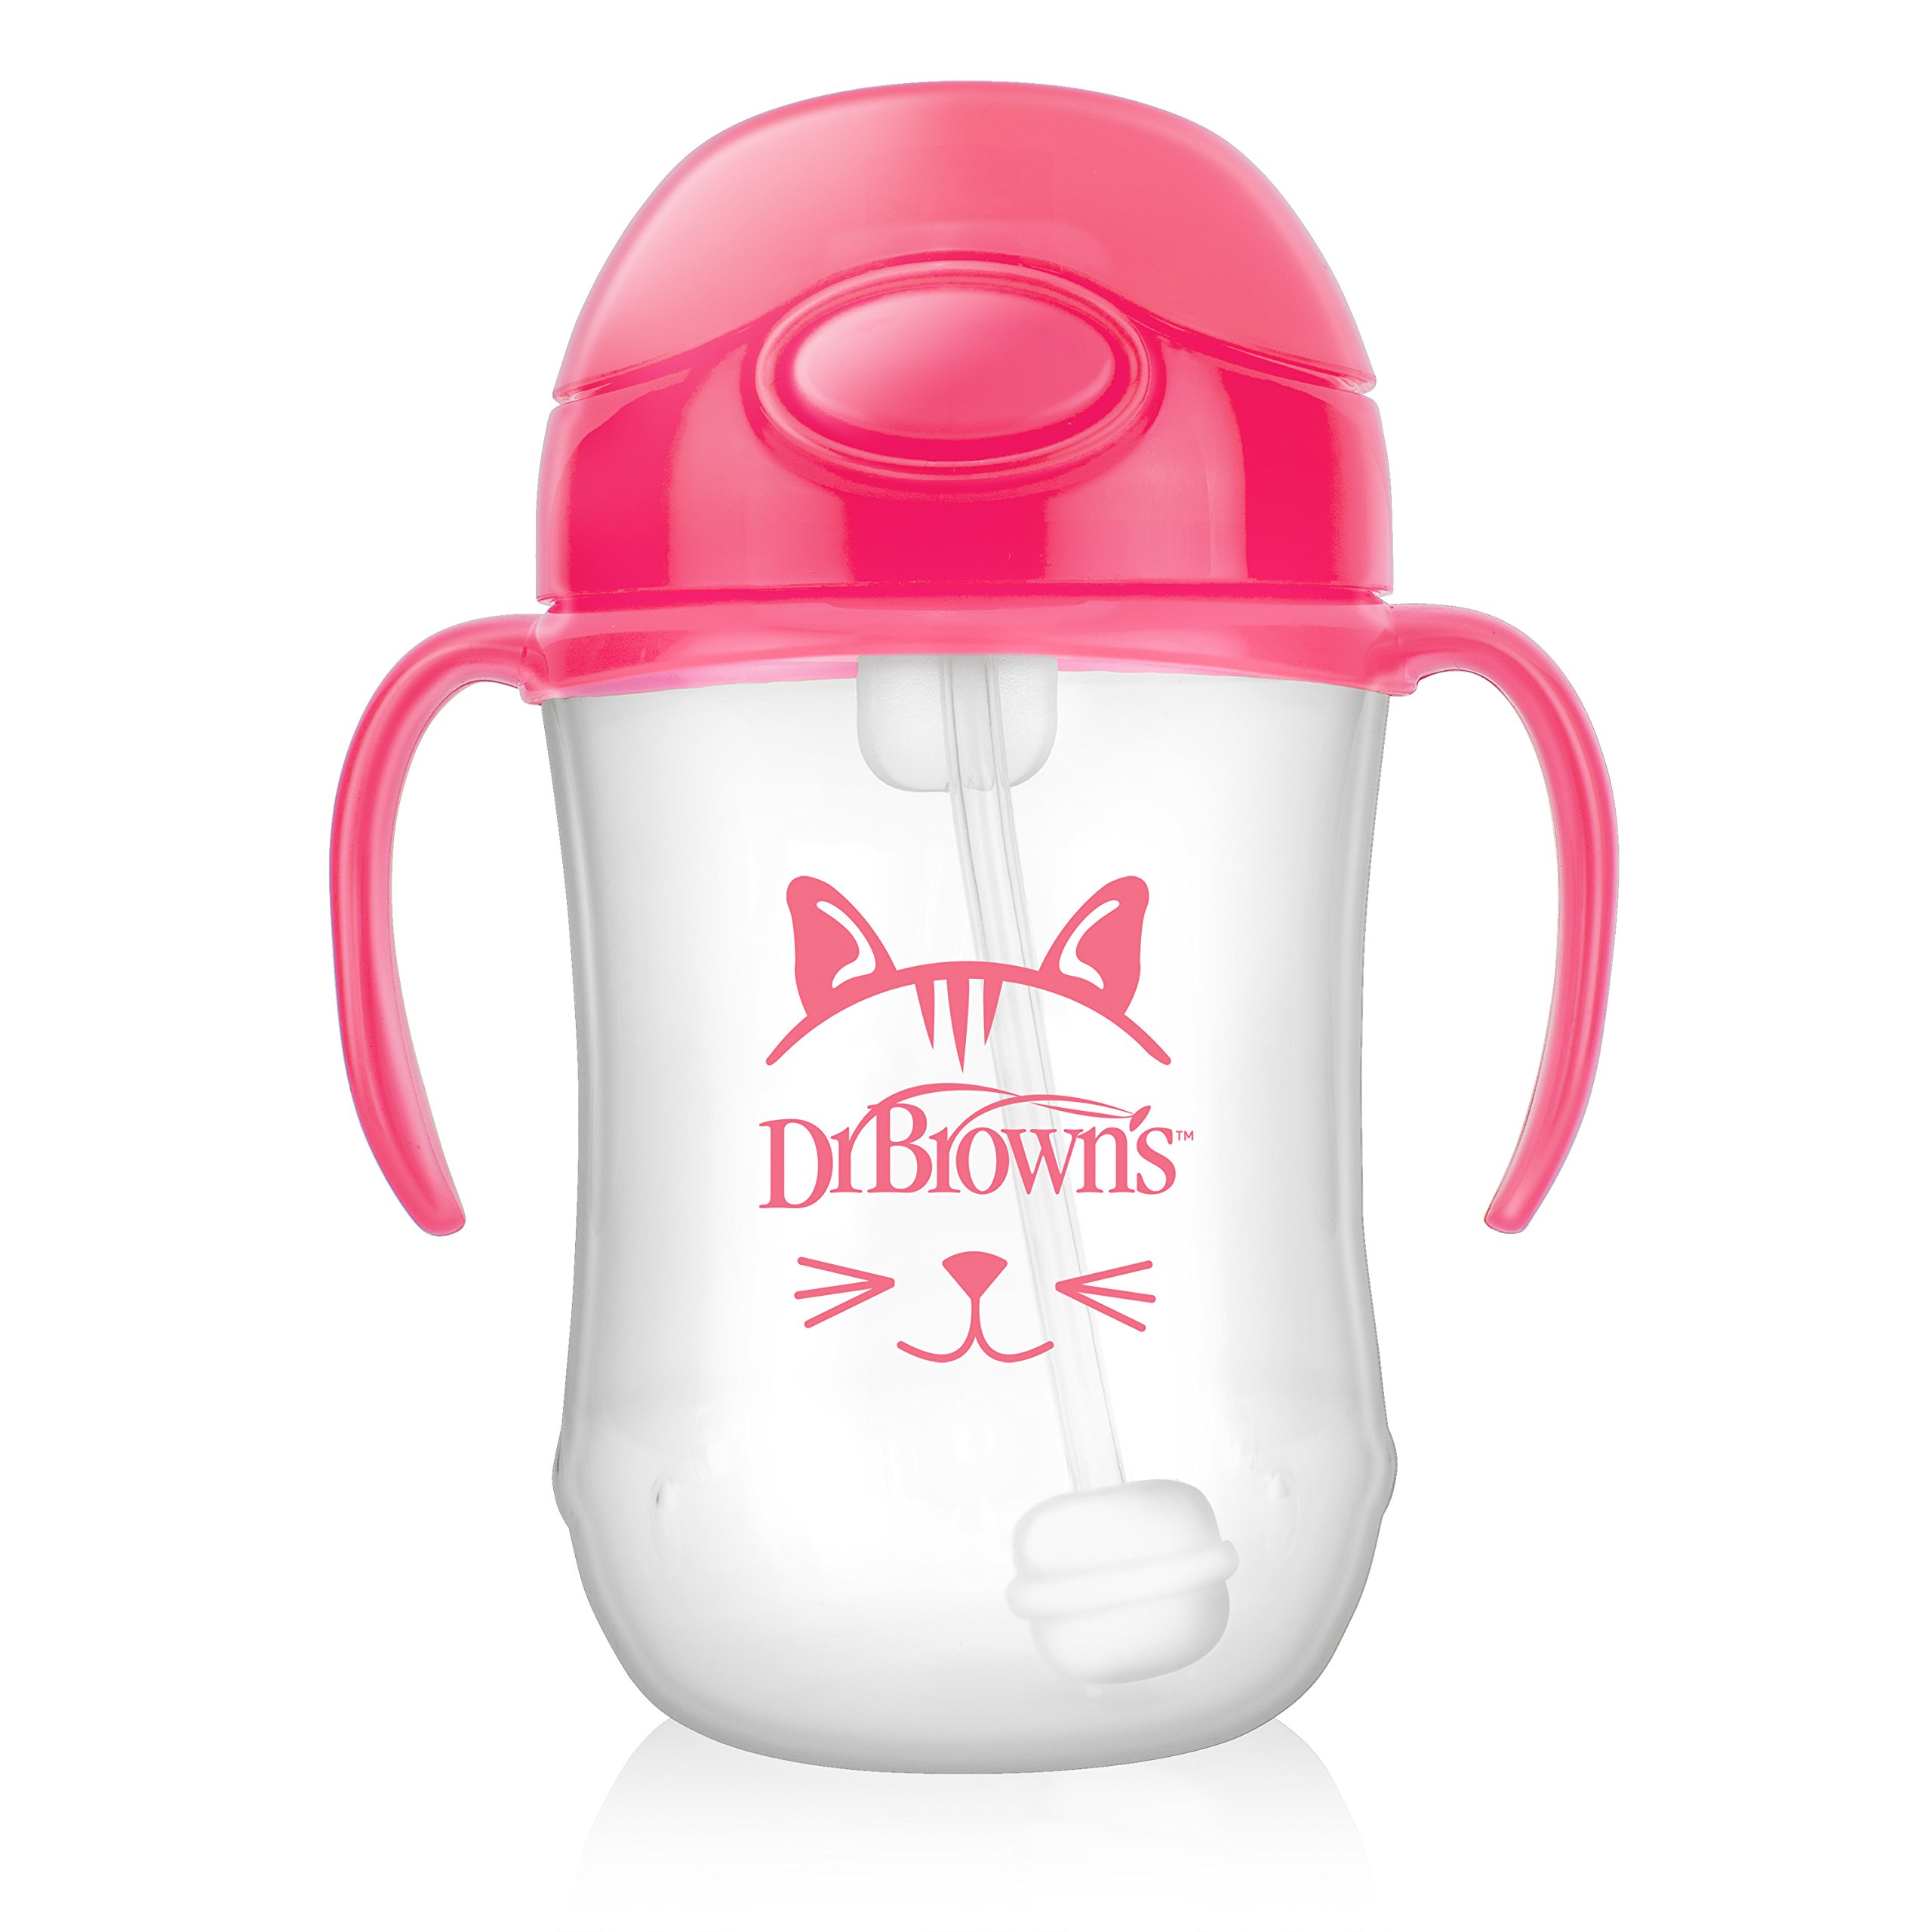 Dr. Brown's Baby's First Straw Cup Sippy Cup with Straw - Pink - 9oz - 6m+